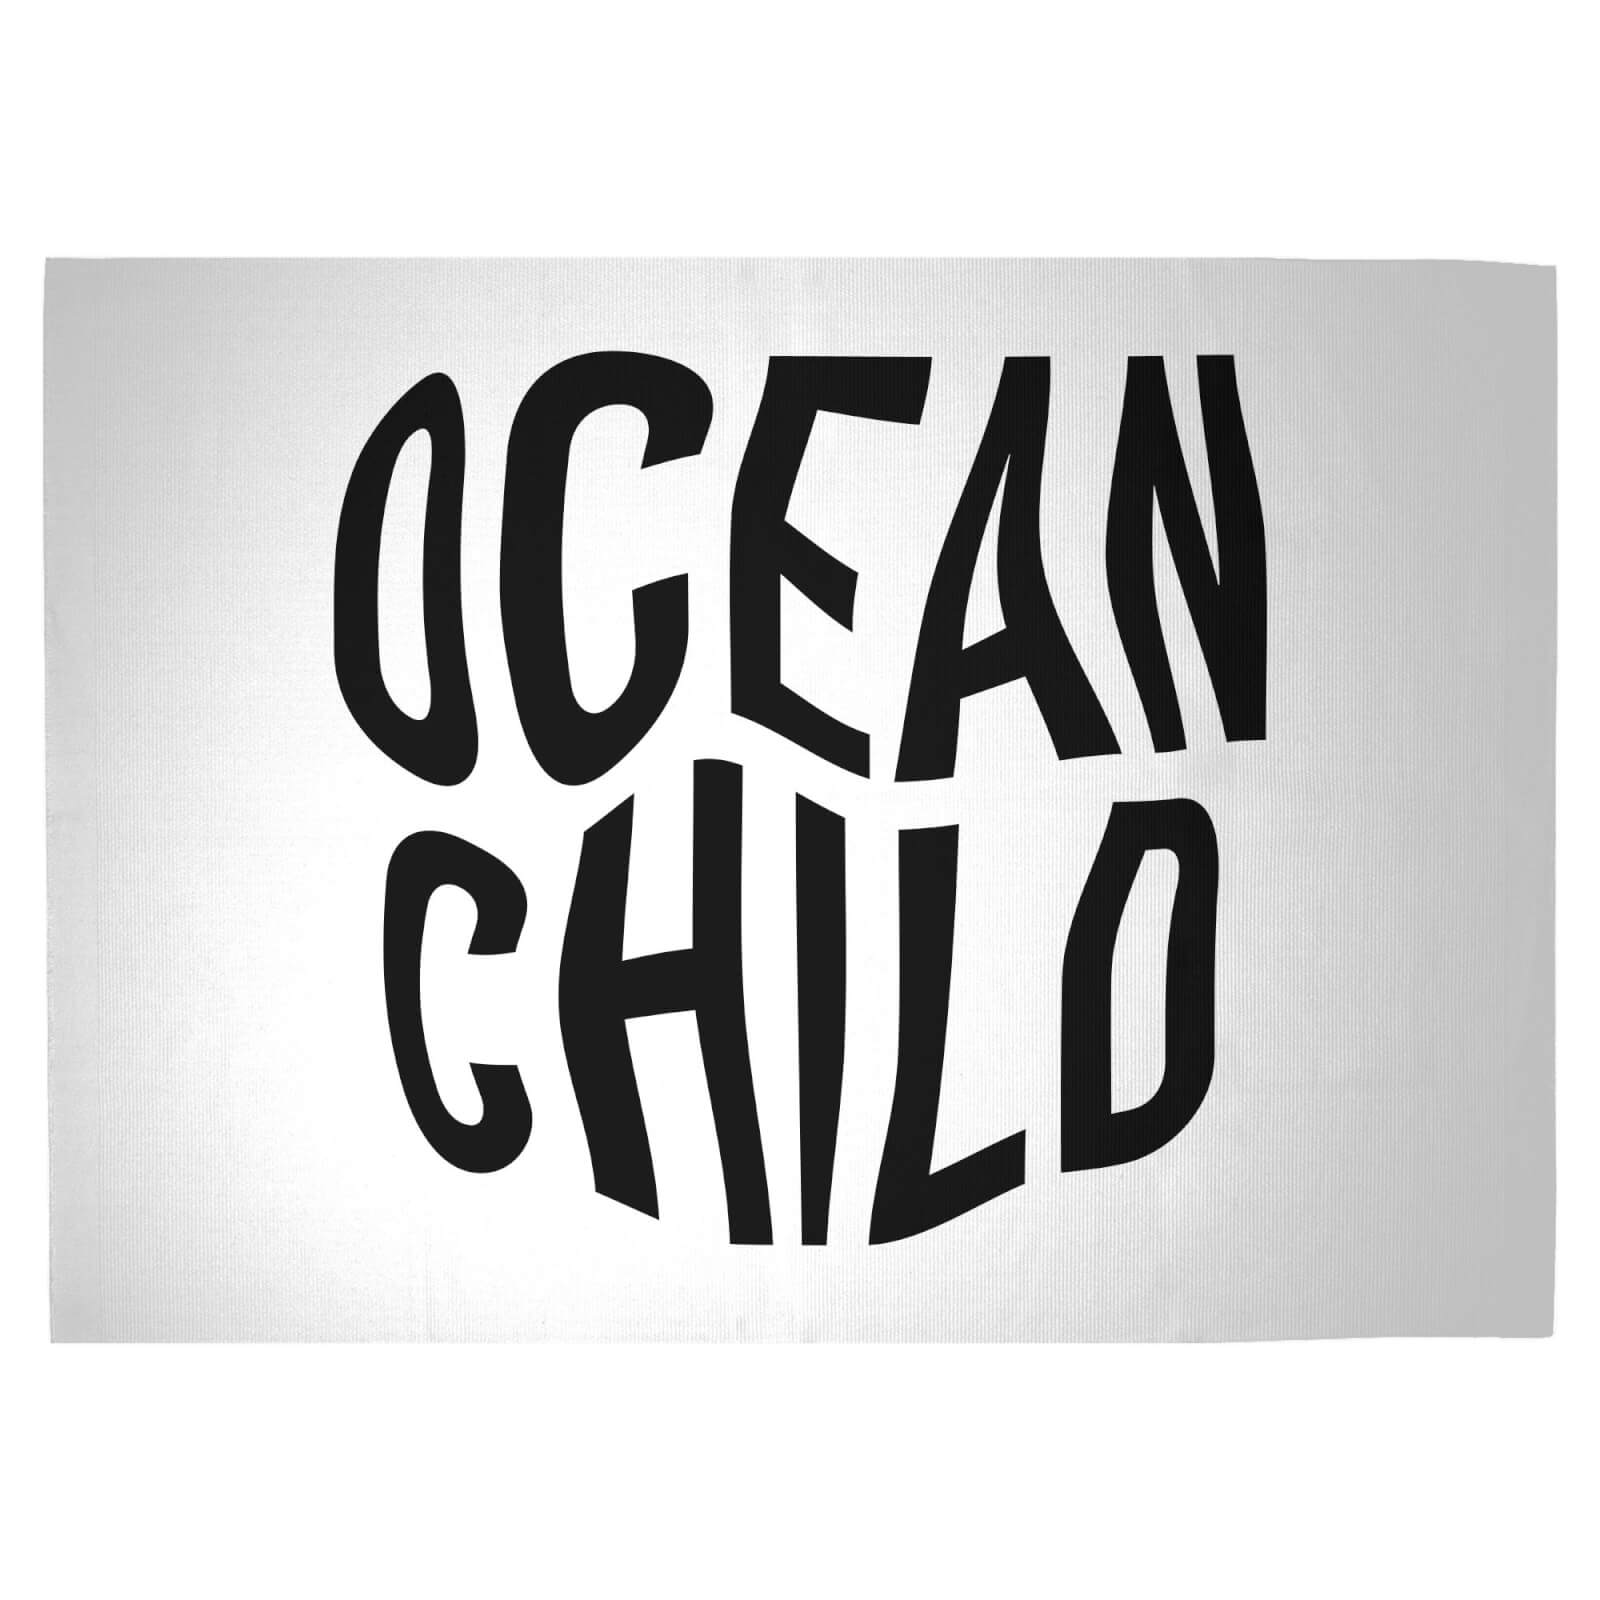 Ocean Child Woven Rug - Large